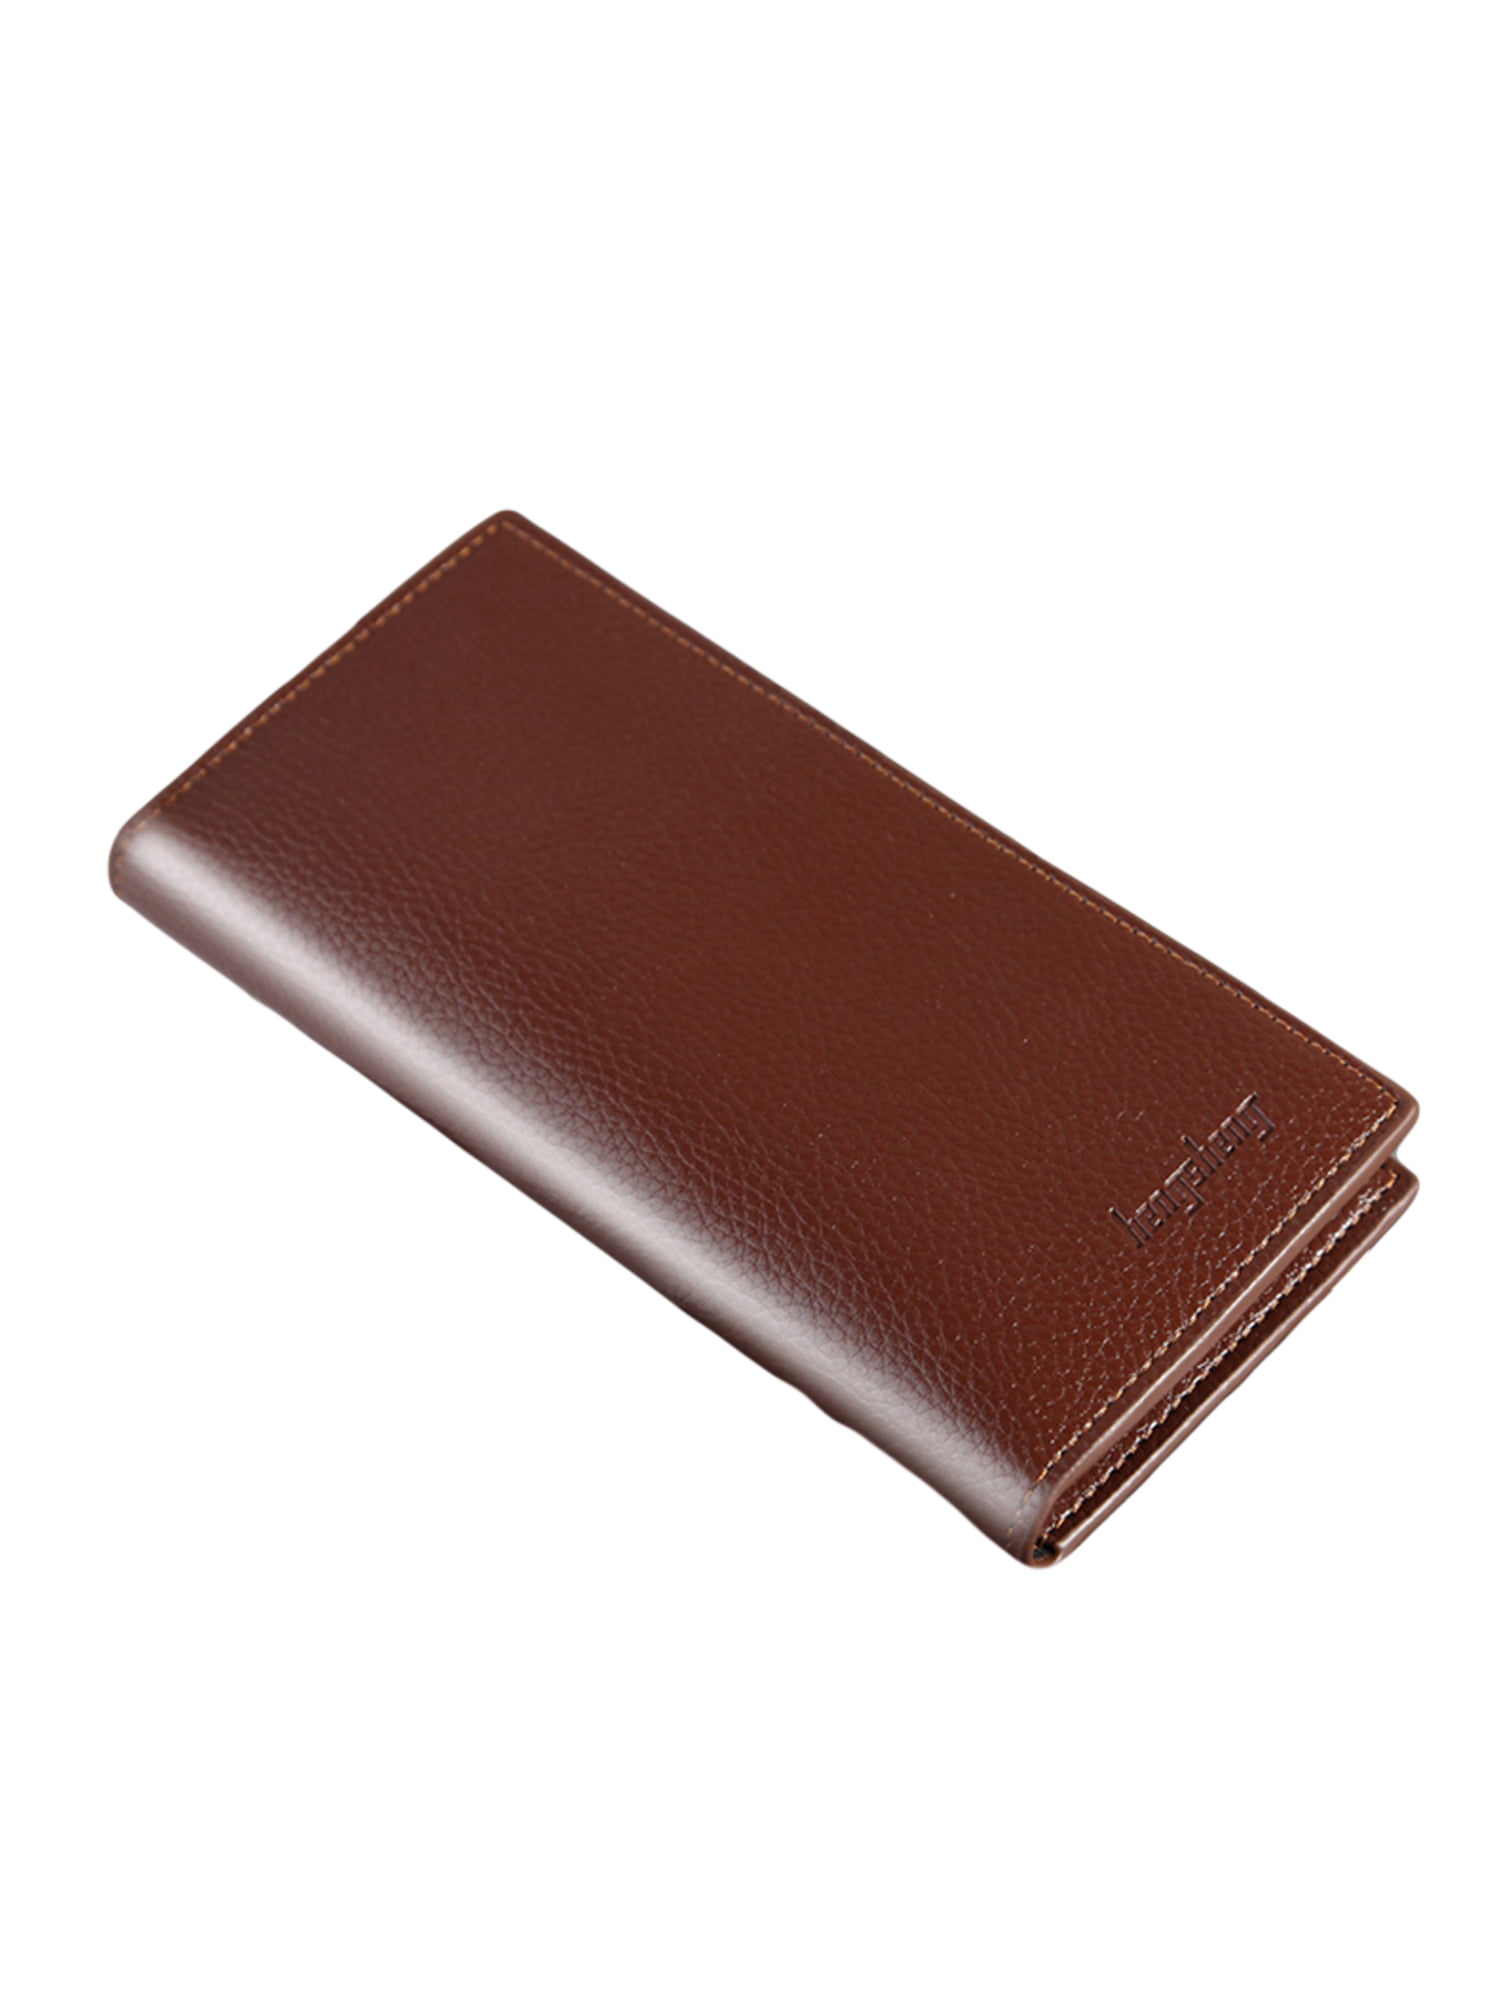 Men’s Luxury Quality Top Leather money Long Wallet Credit Card Holder Purse UK 